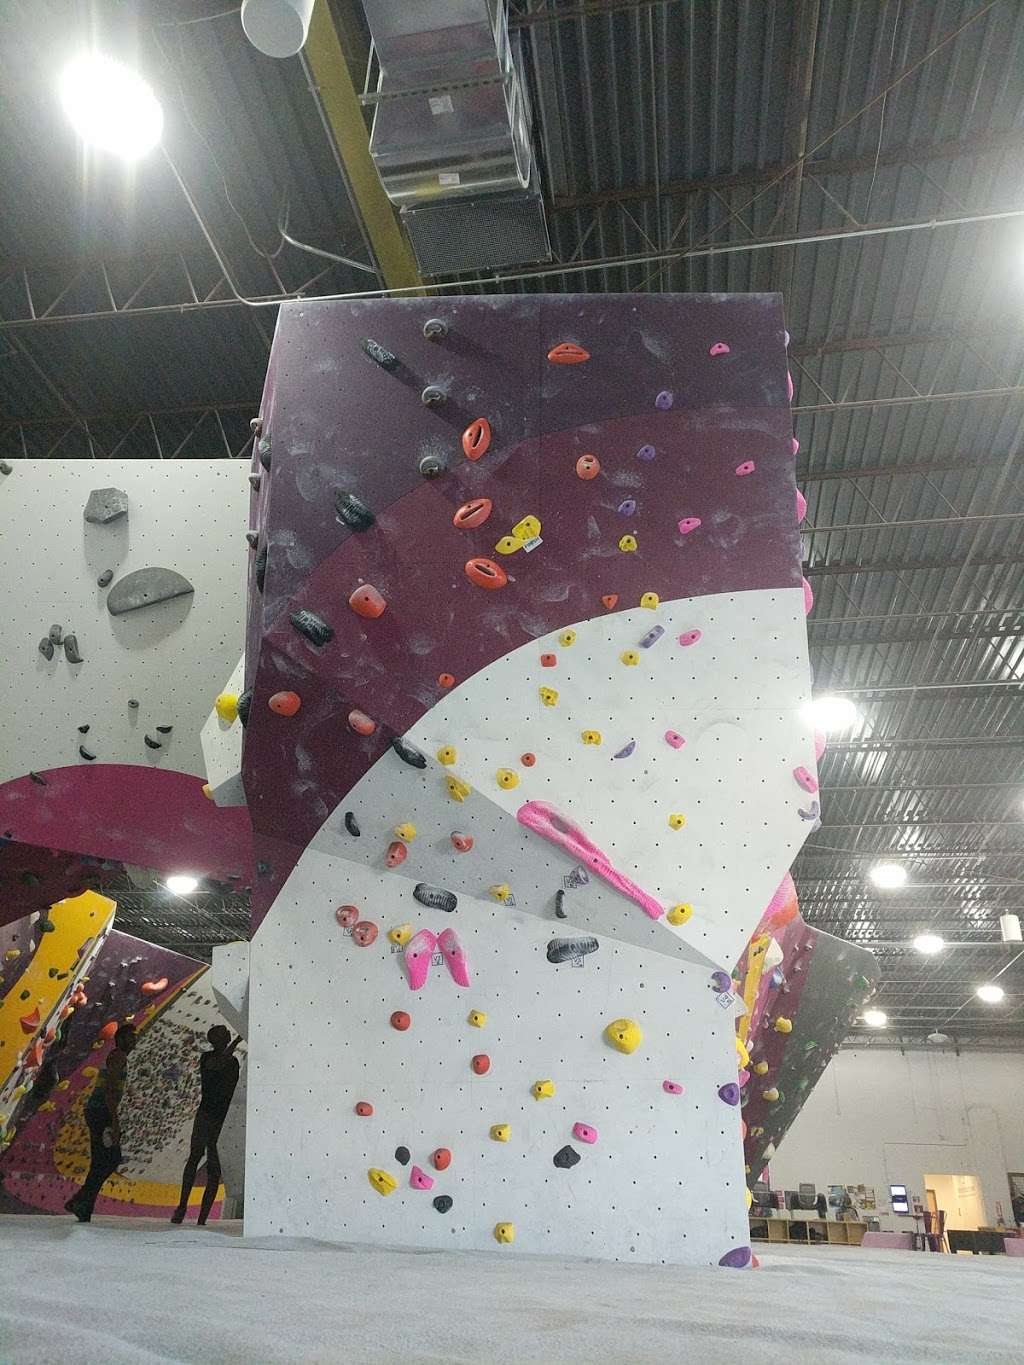 First Ascent Humboldt Park | 2950 W Grand Ave, Chicago, IL 60622 | Phone: (773) 697-9743